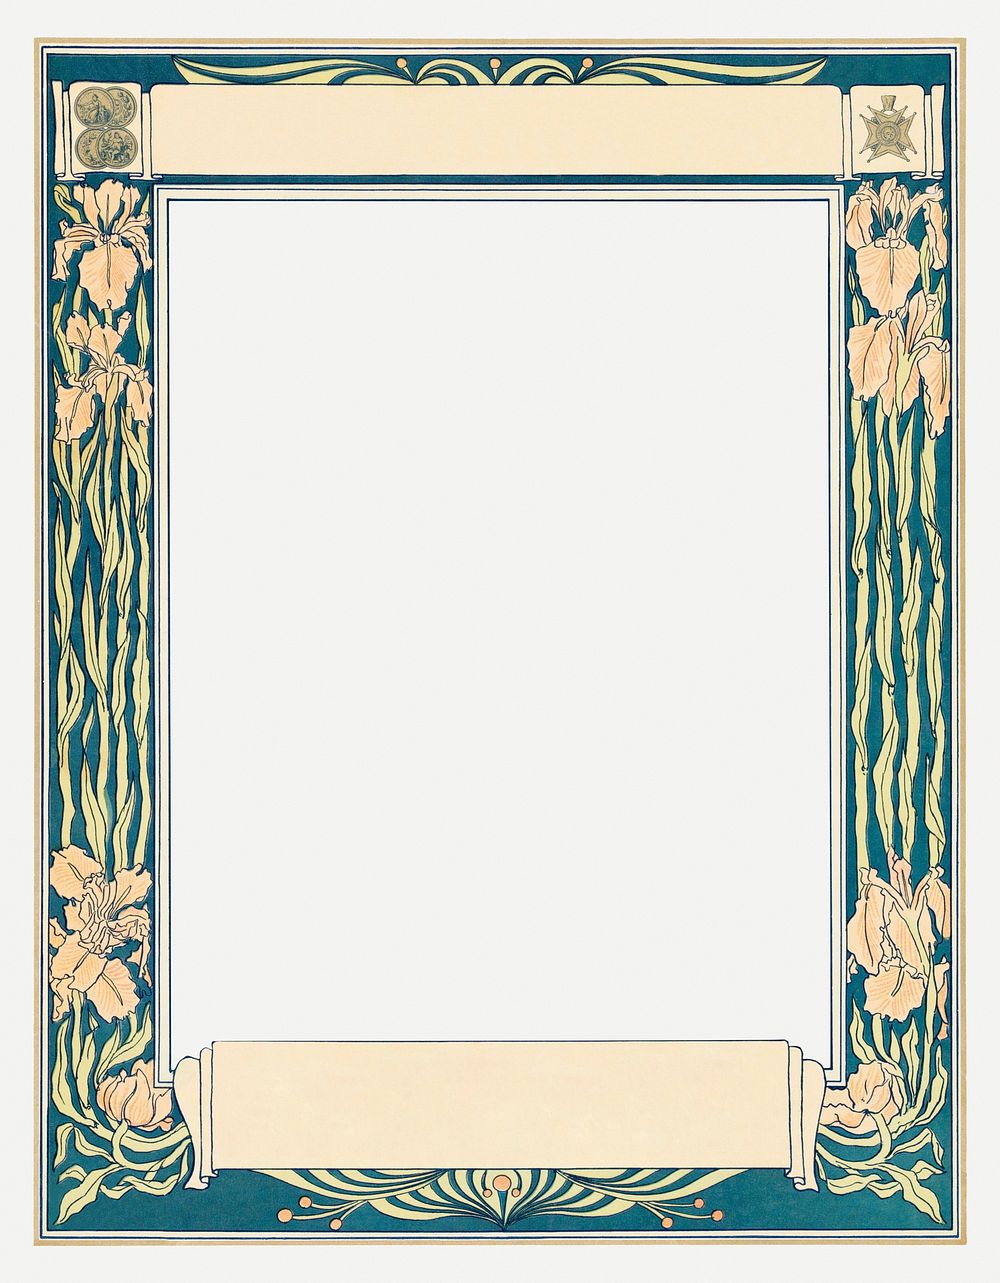 Vintage green floral frame with design space, remixed from the artworks by Johann Georg van Caspel